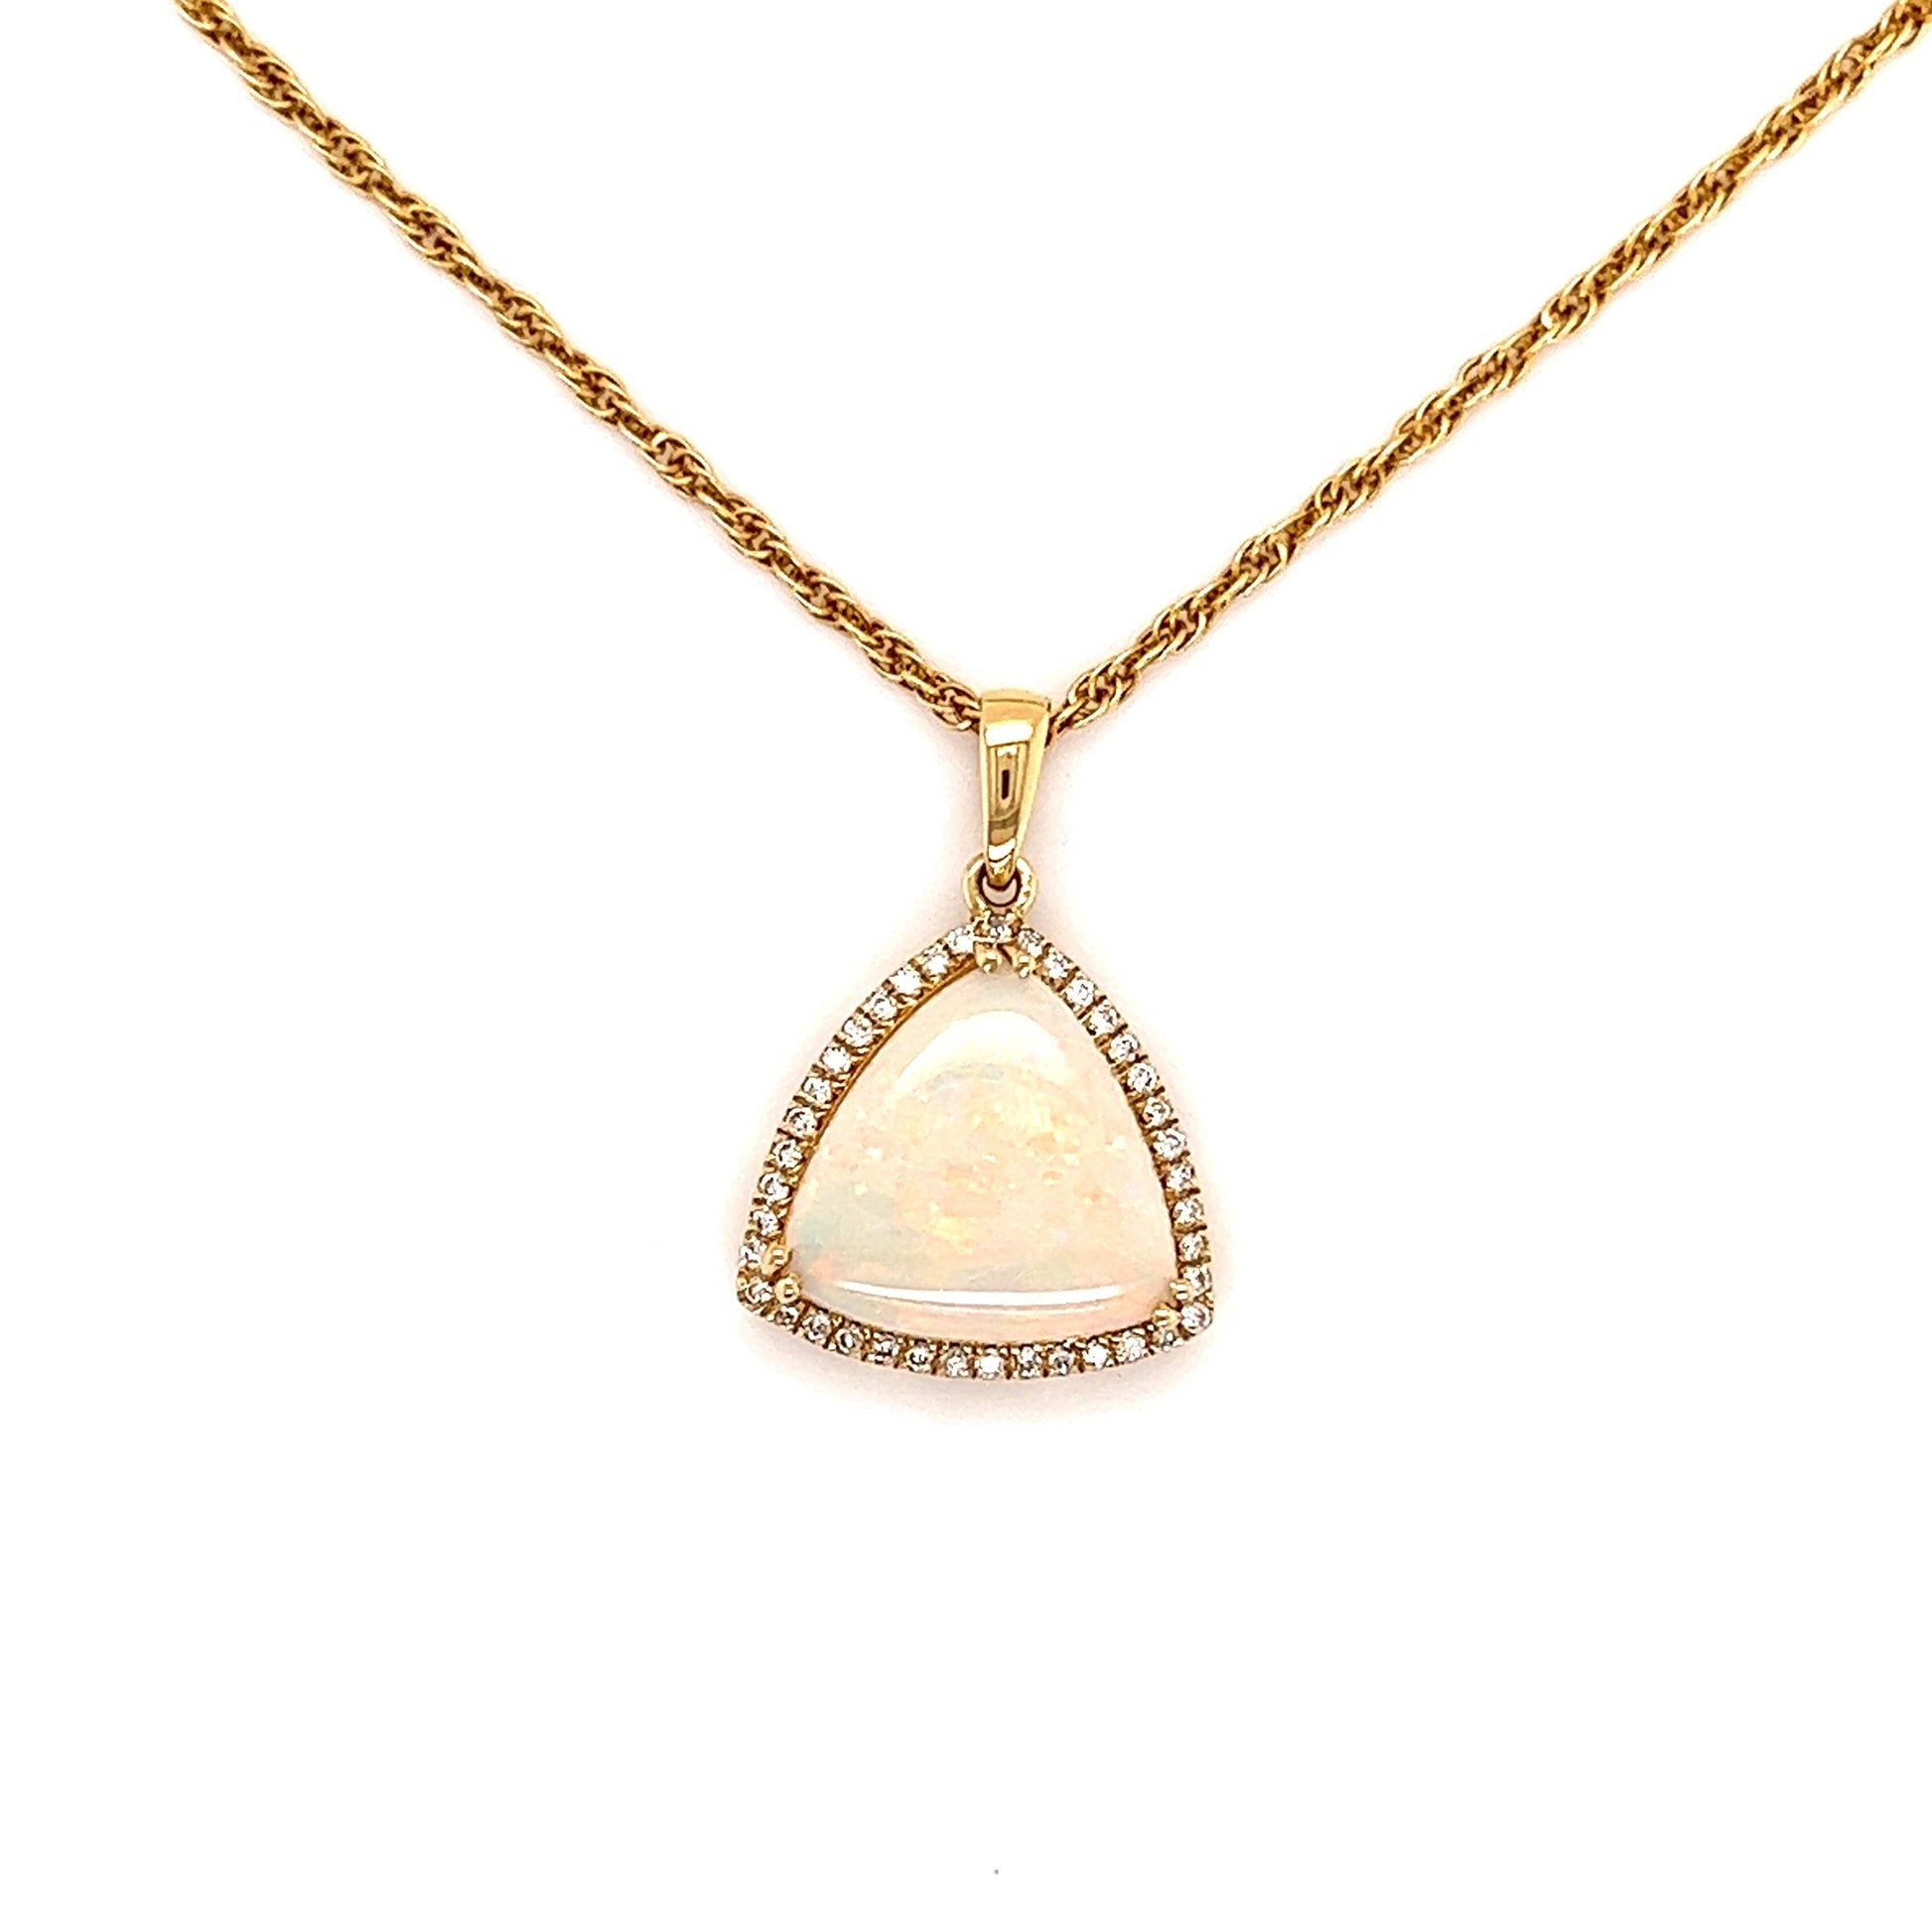 White Opal Pendant with Diamond Halo in 14K Yellow Gold Front View with Chain